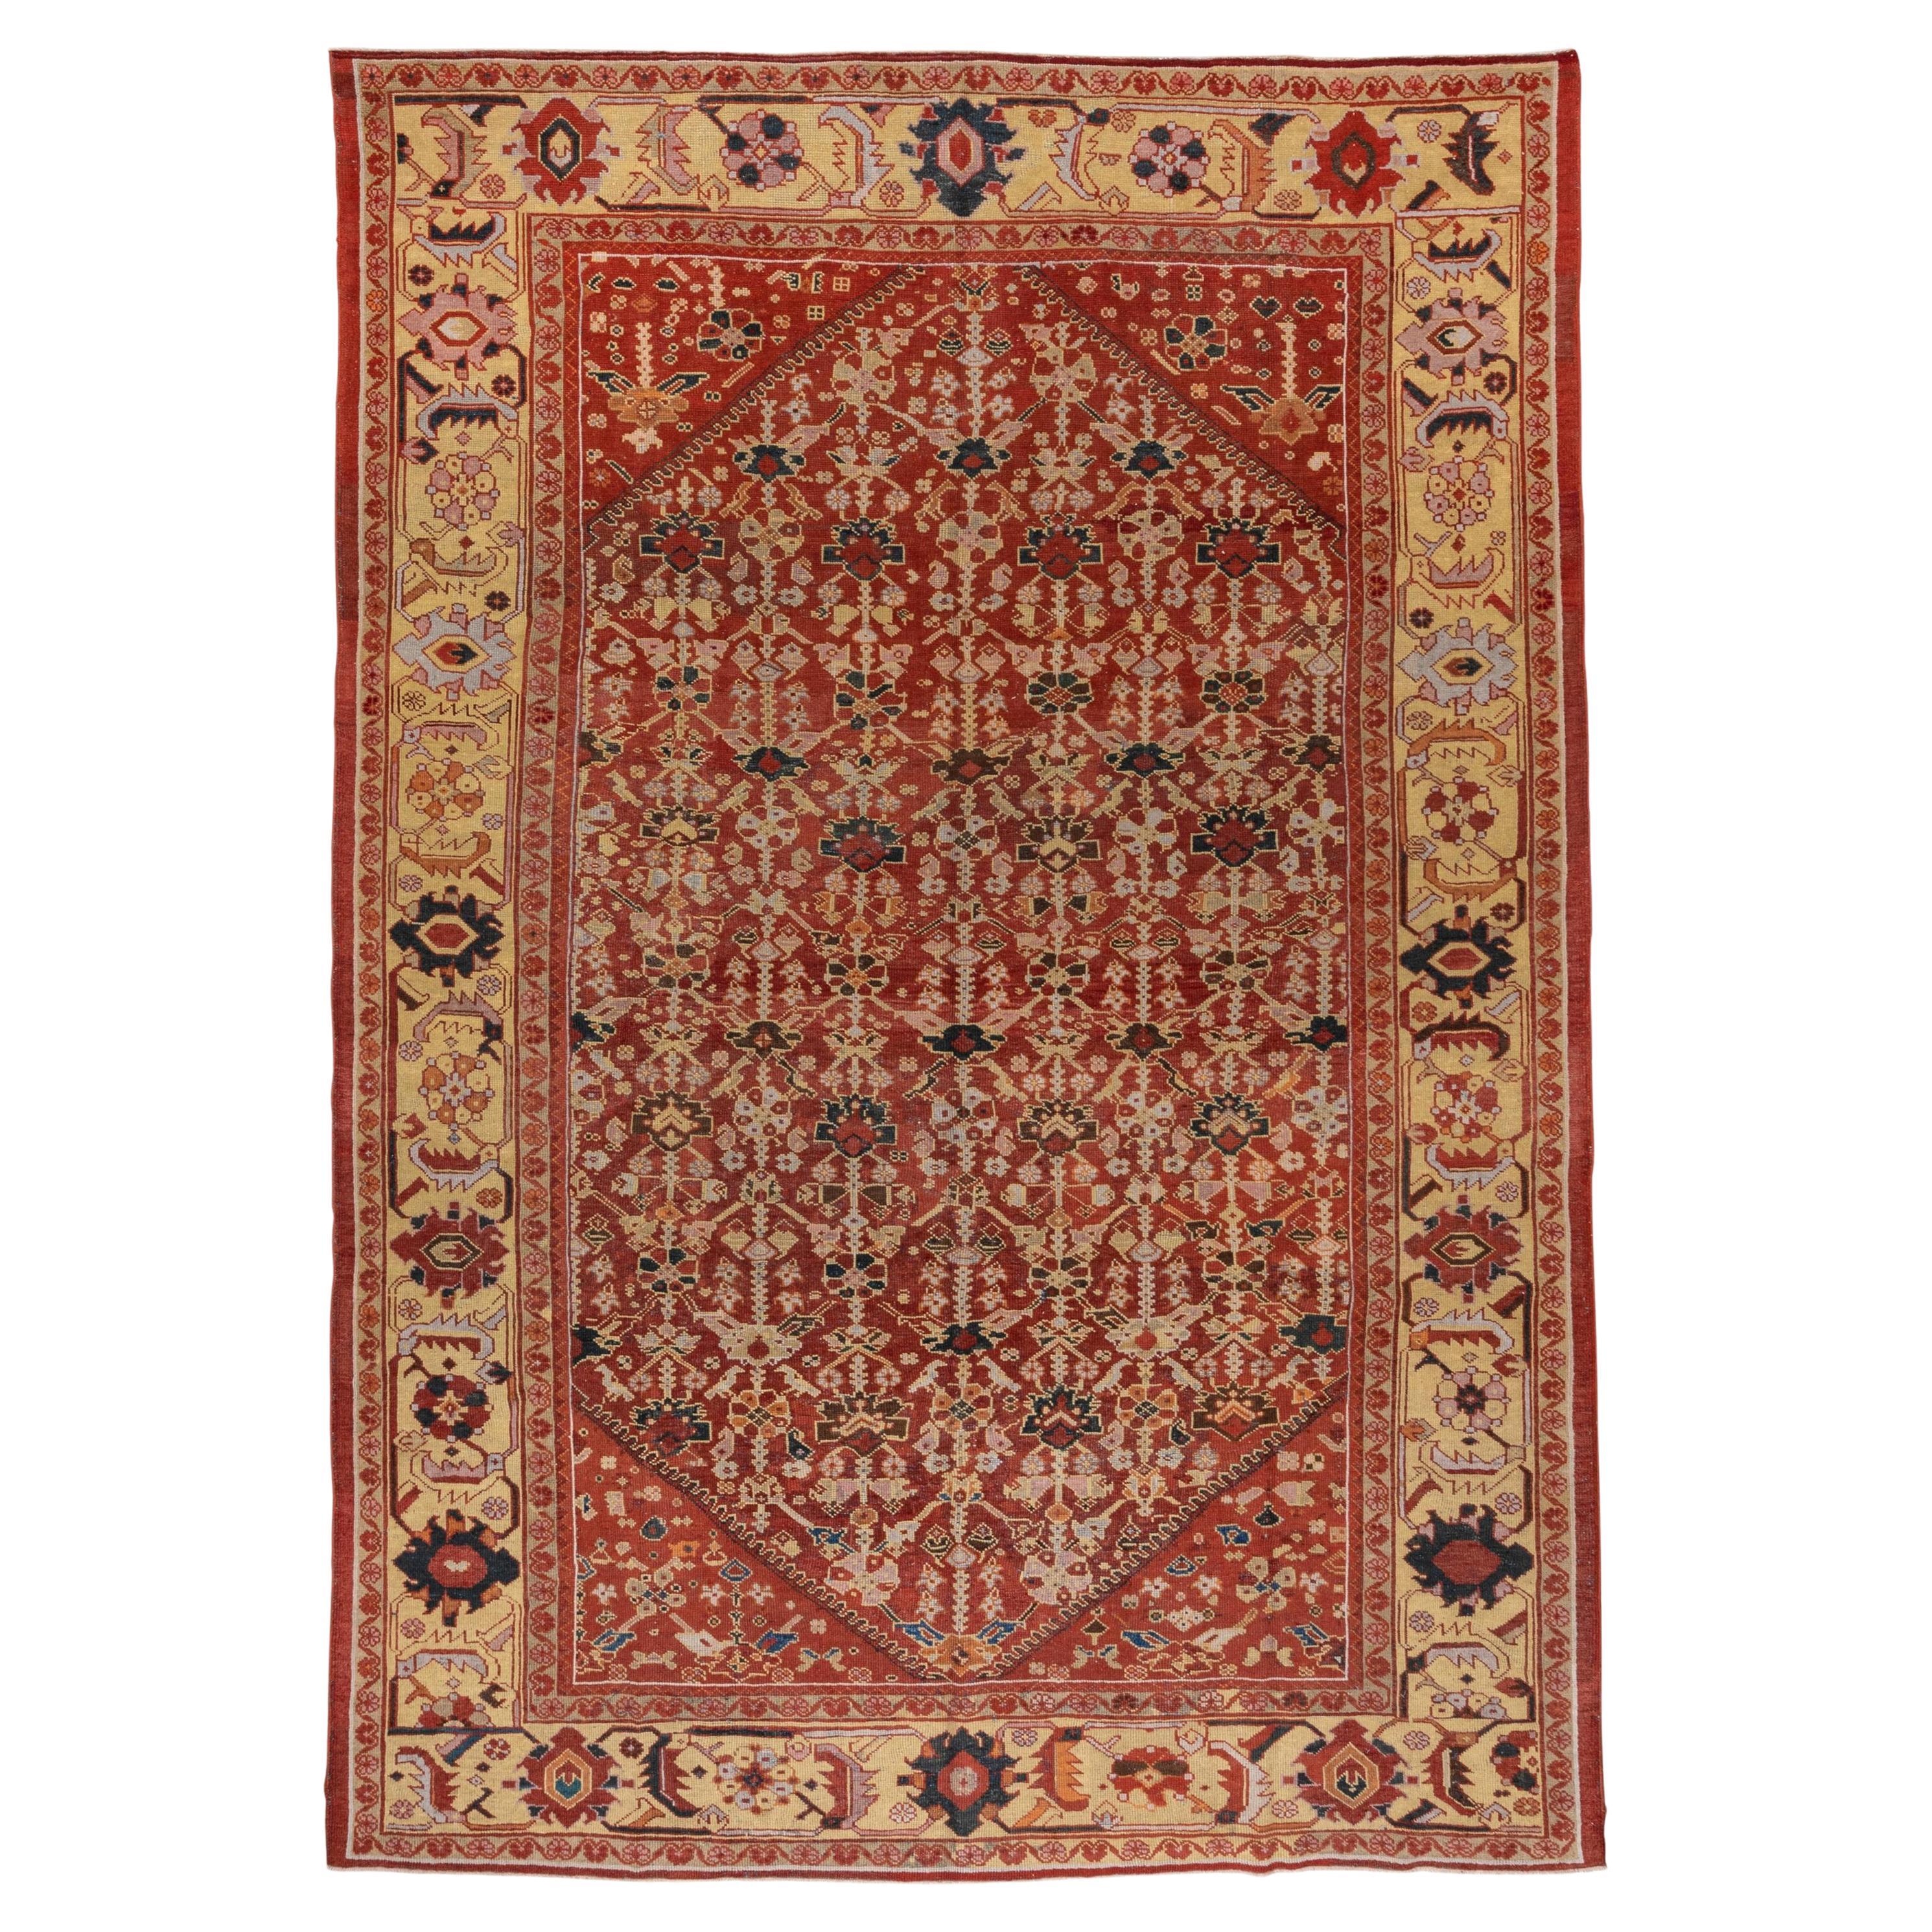 Antique Tribal Persian Mahal Rug, Allover Rusty Red Field, Yellow Borders